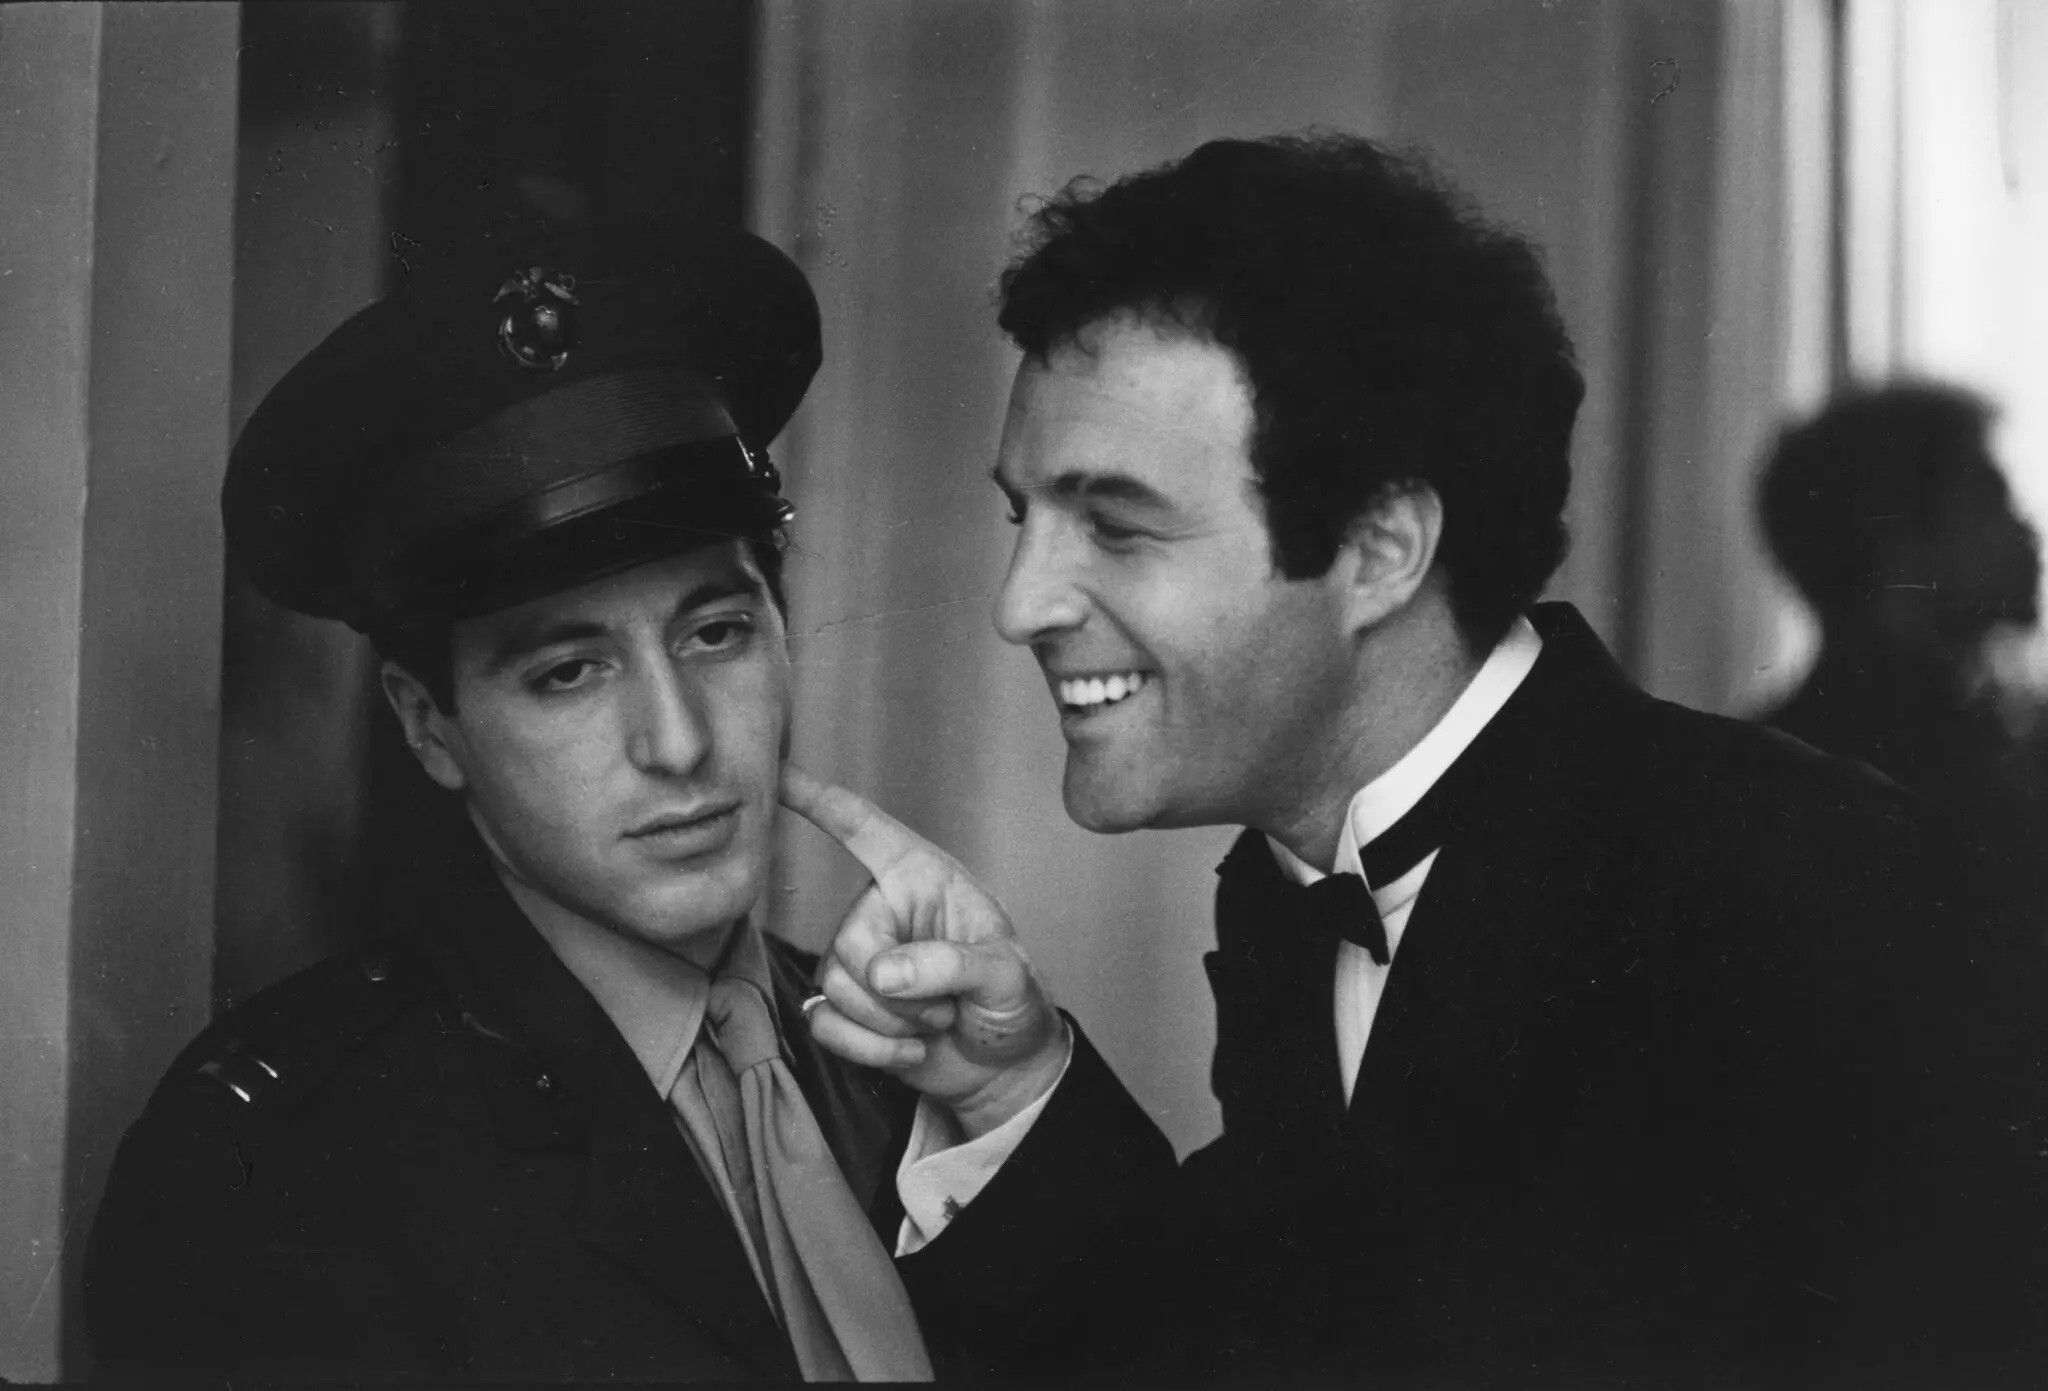 50 Years Later, Al Pacino Reflects on the "New Identity" Given to Him by  'The Godfather'